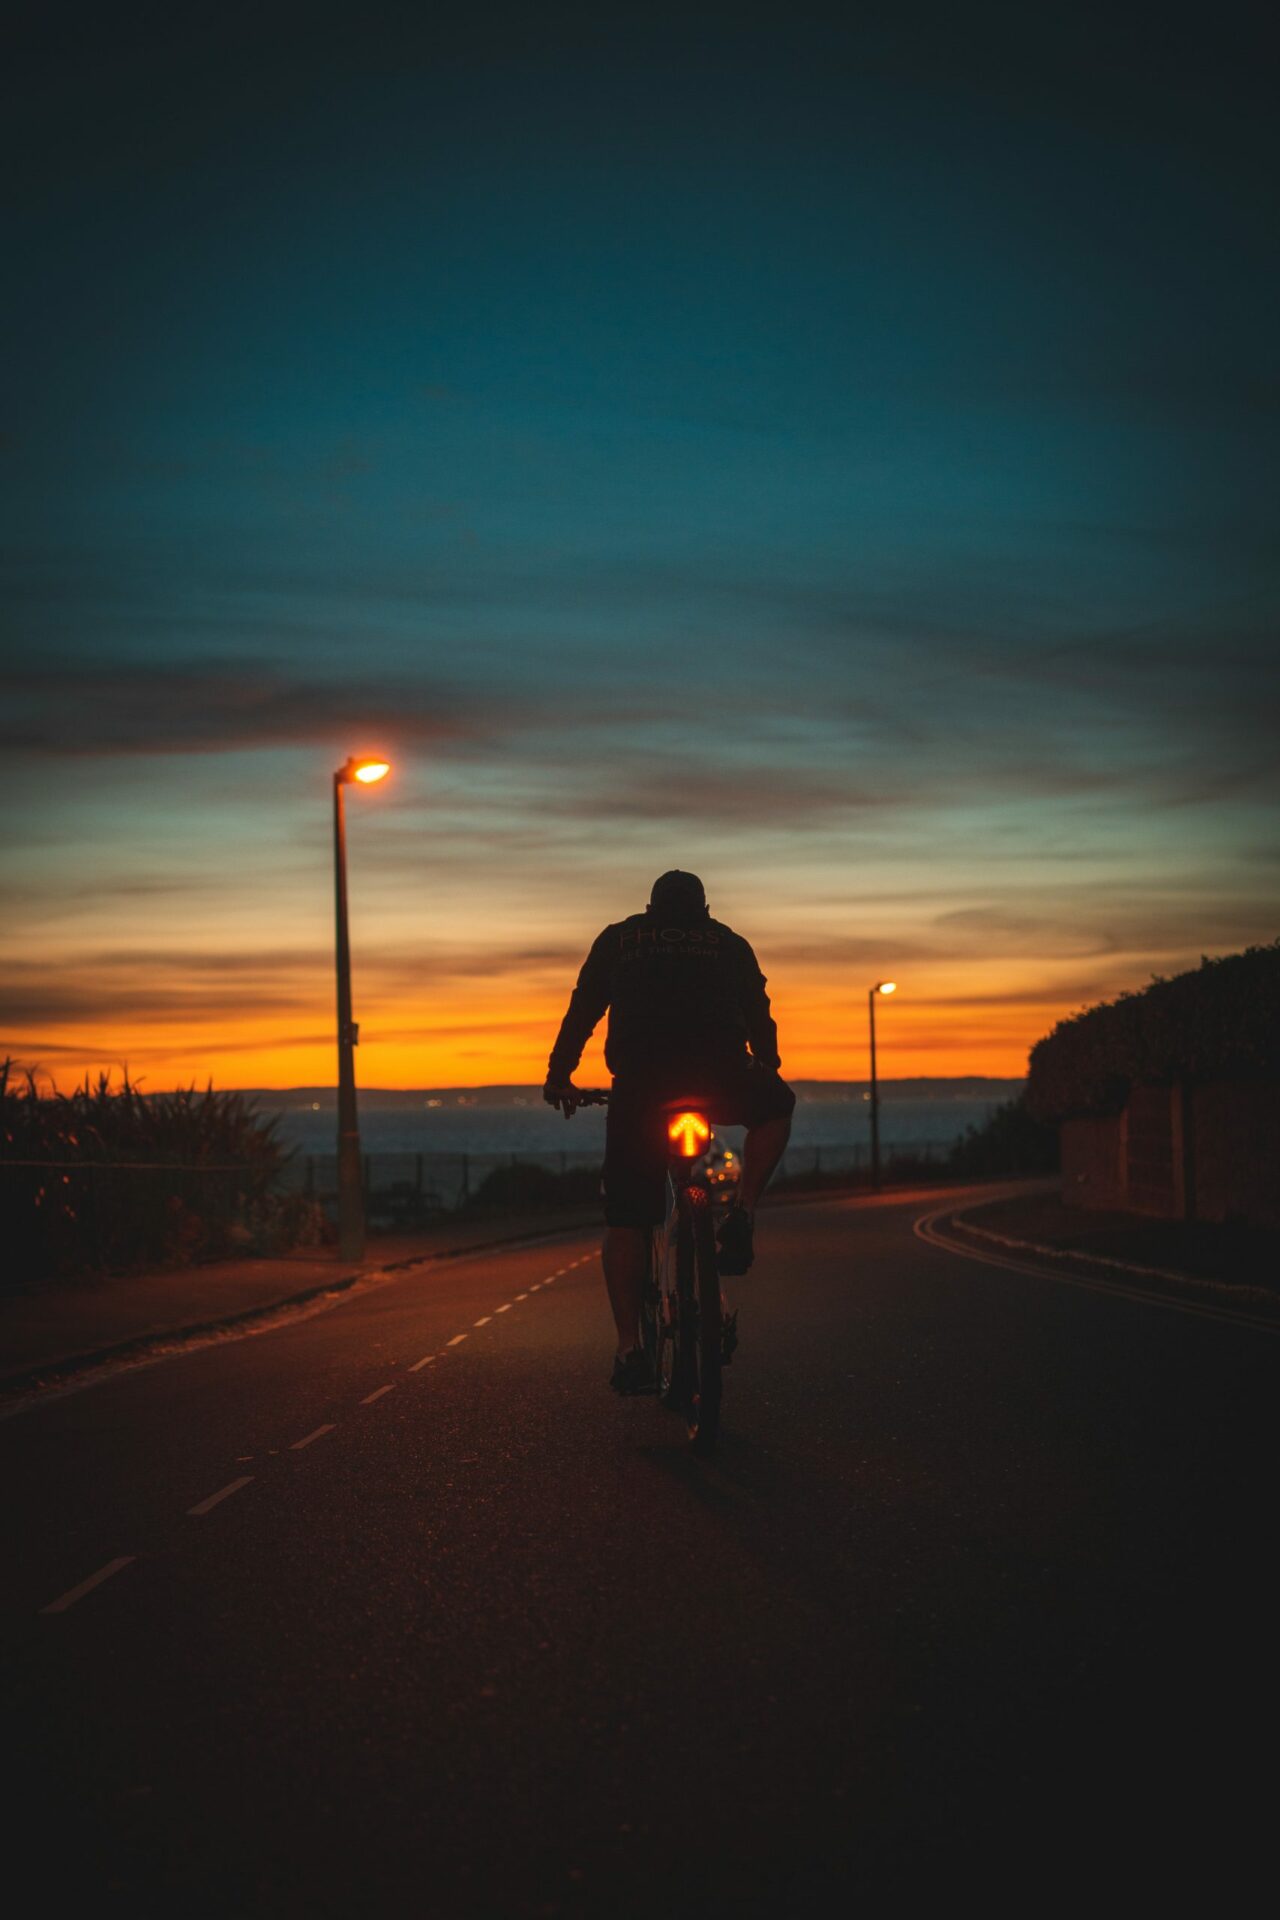 Cyclist using the Illuminated Signalling Tailbag with bright LED directional indicators on his bike in low-light conditions